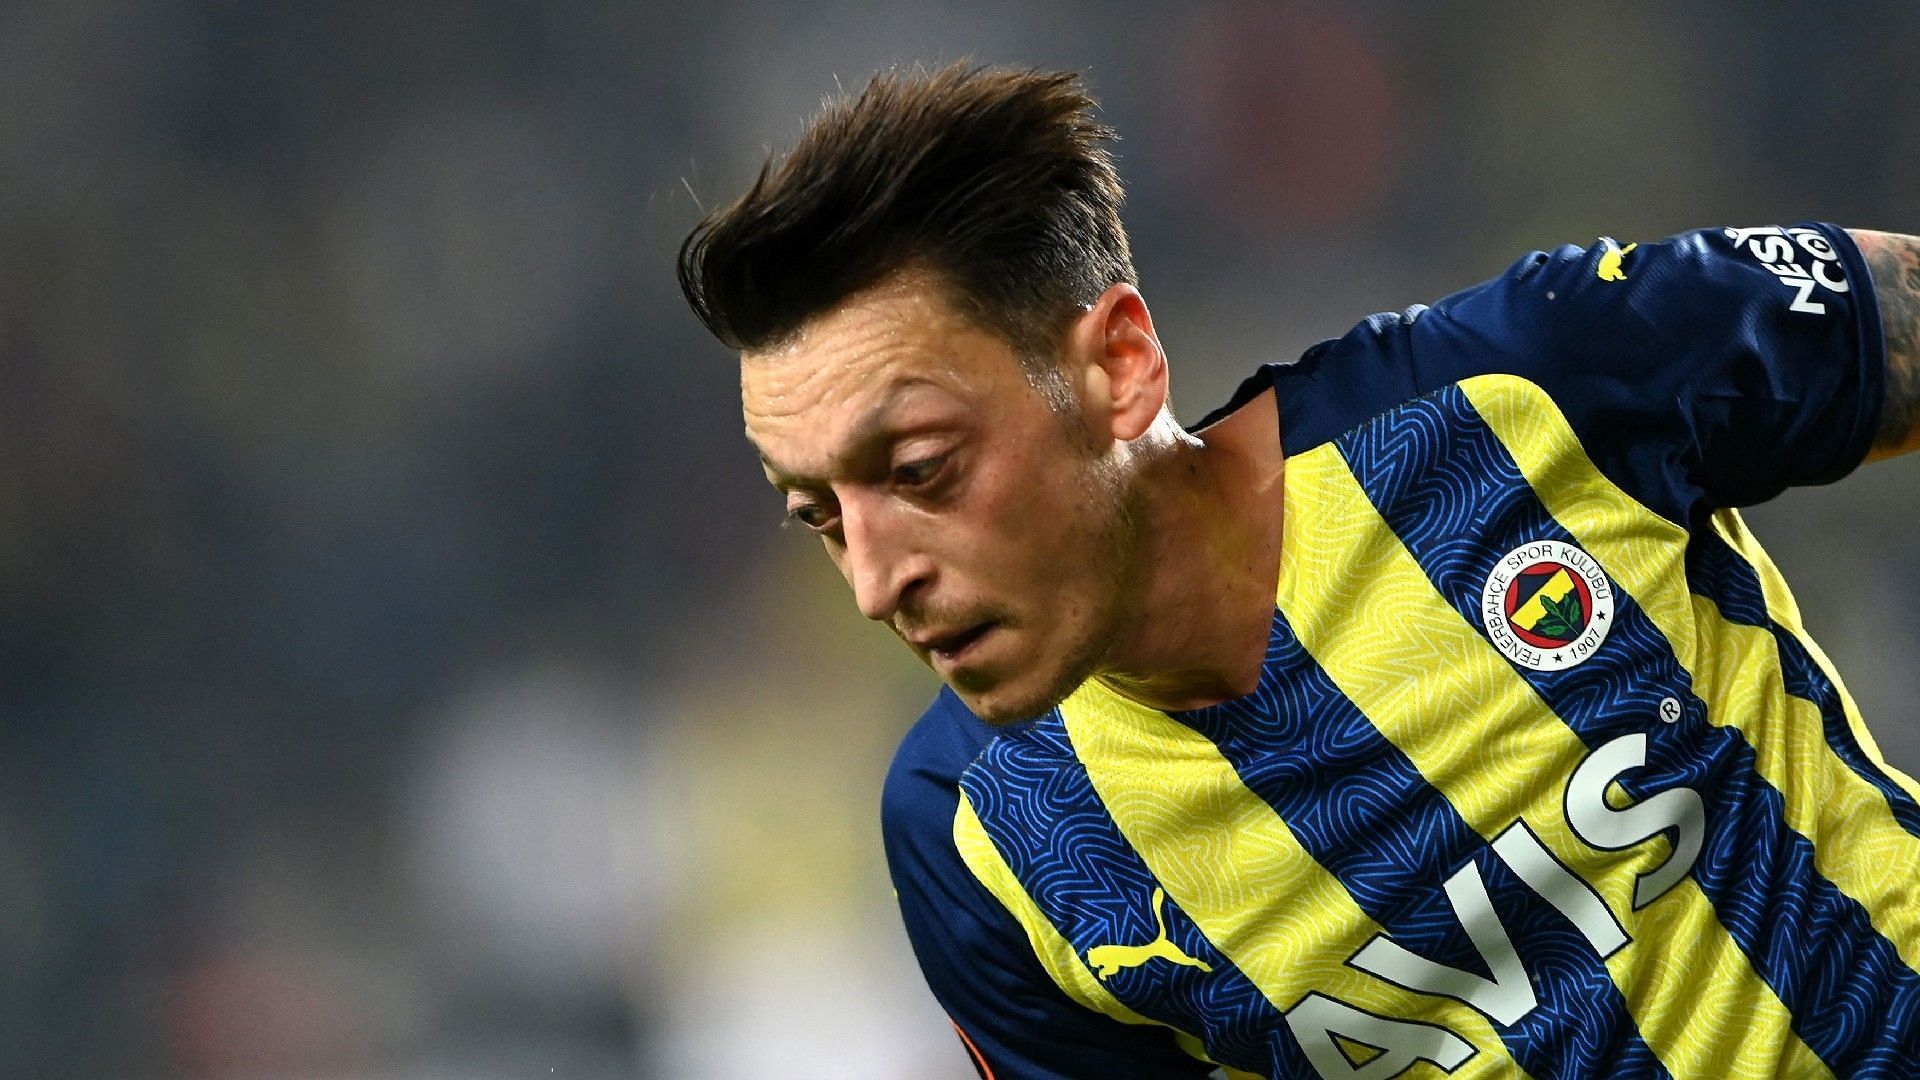 Fenerbahce will look up to Ozil to elevate them to the top.